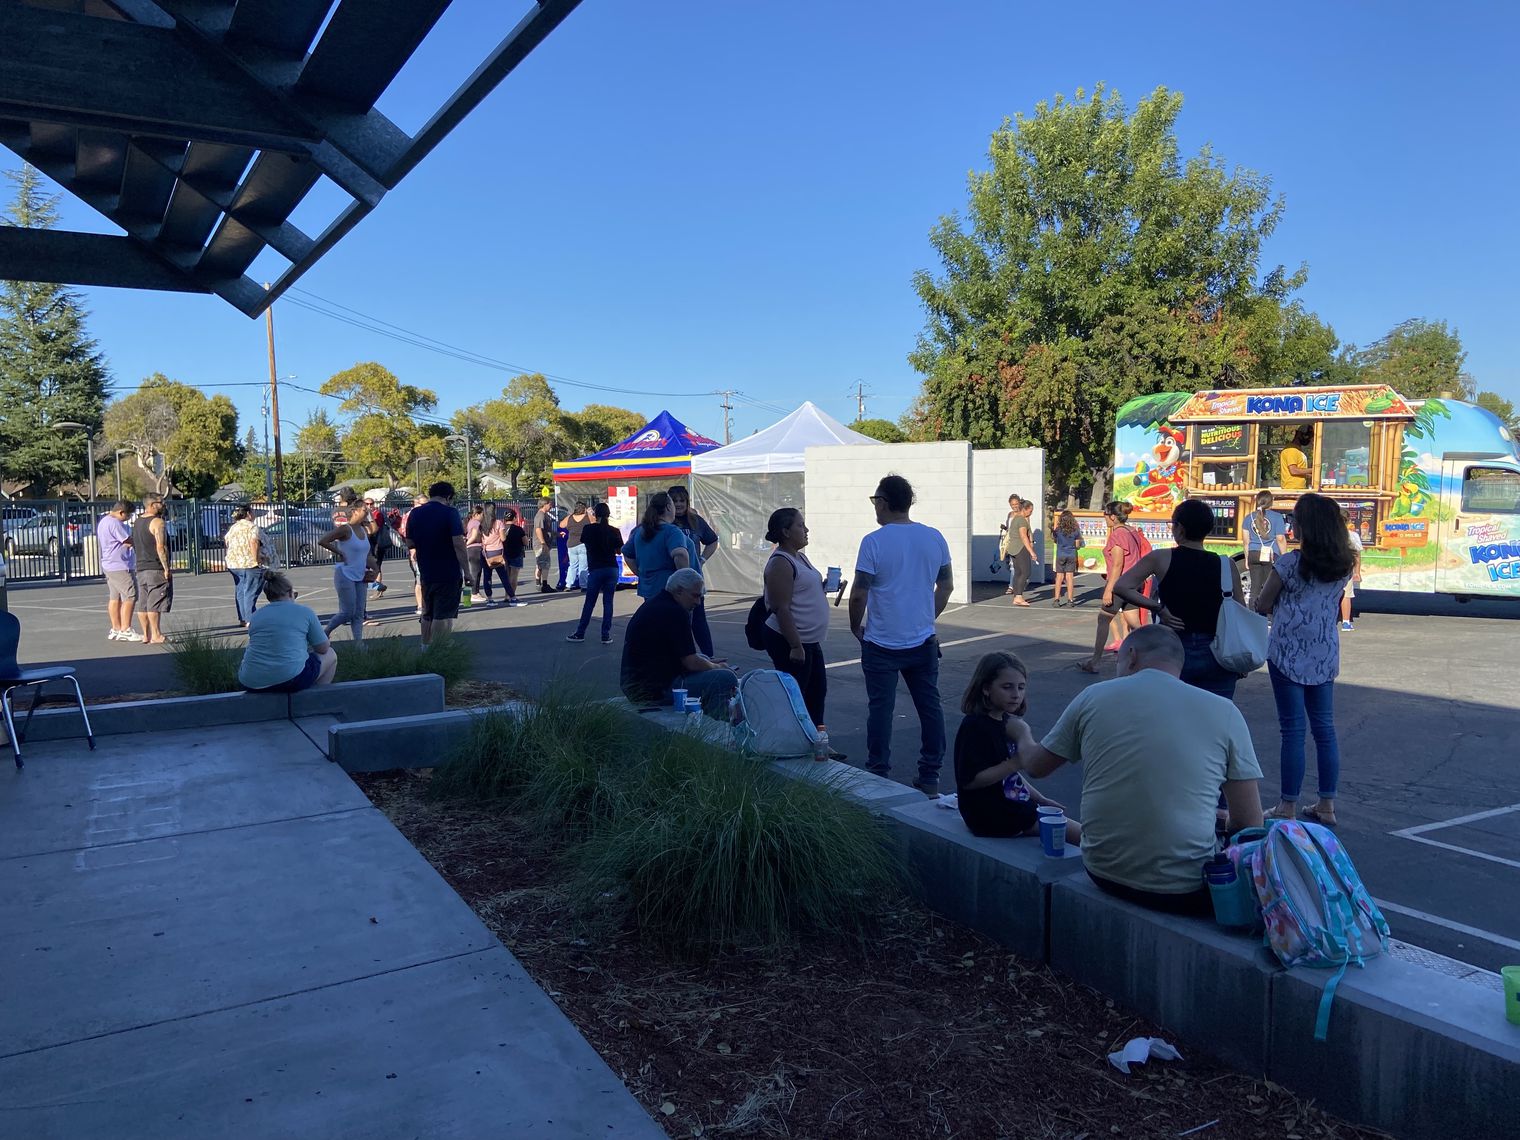 Families and food trucks